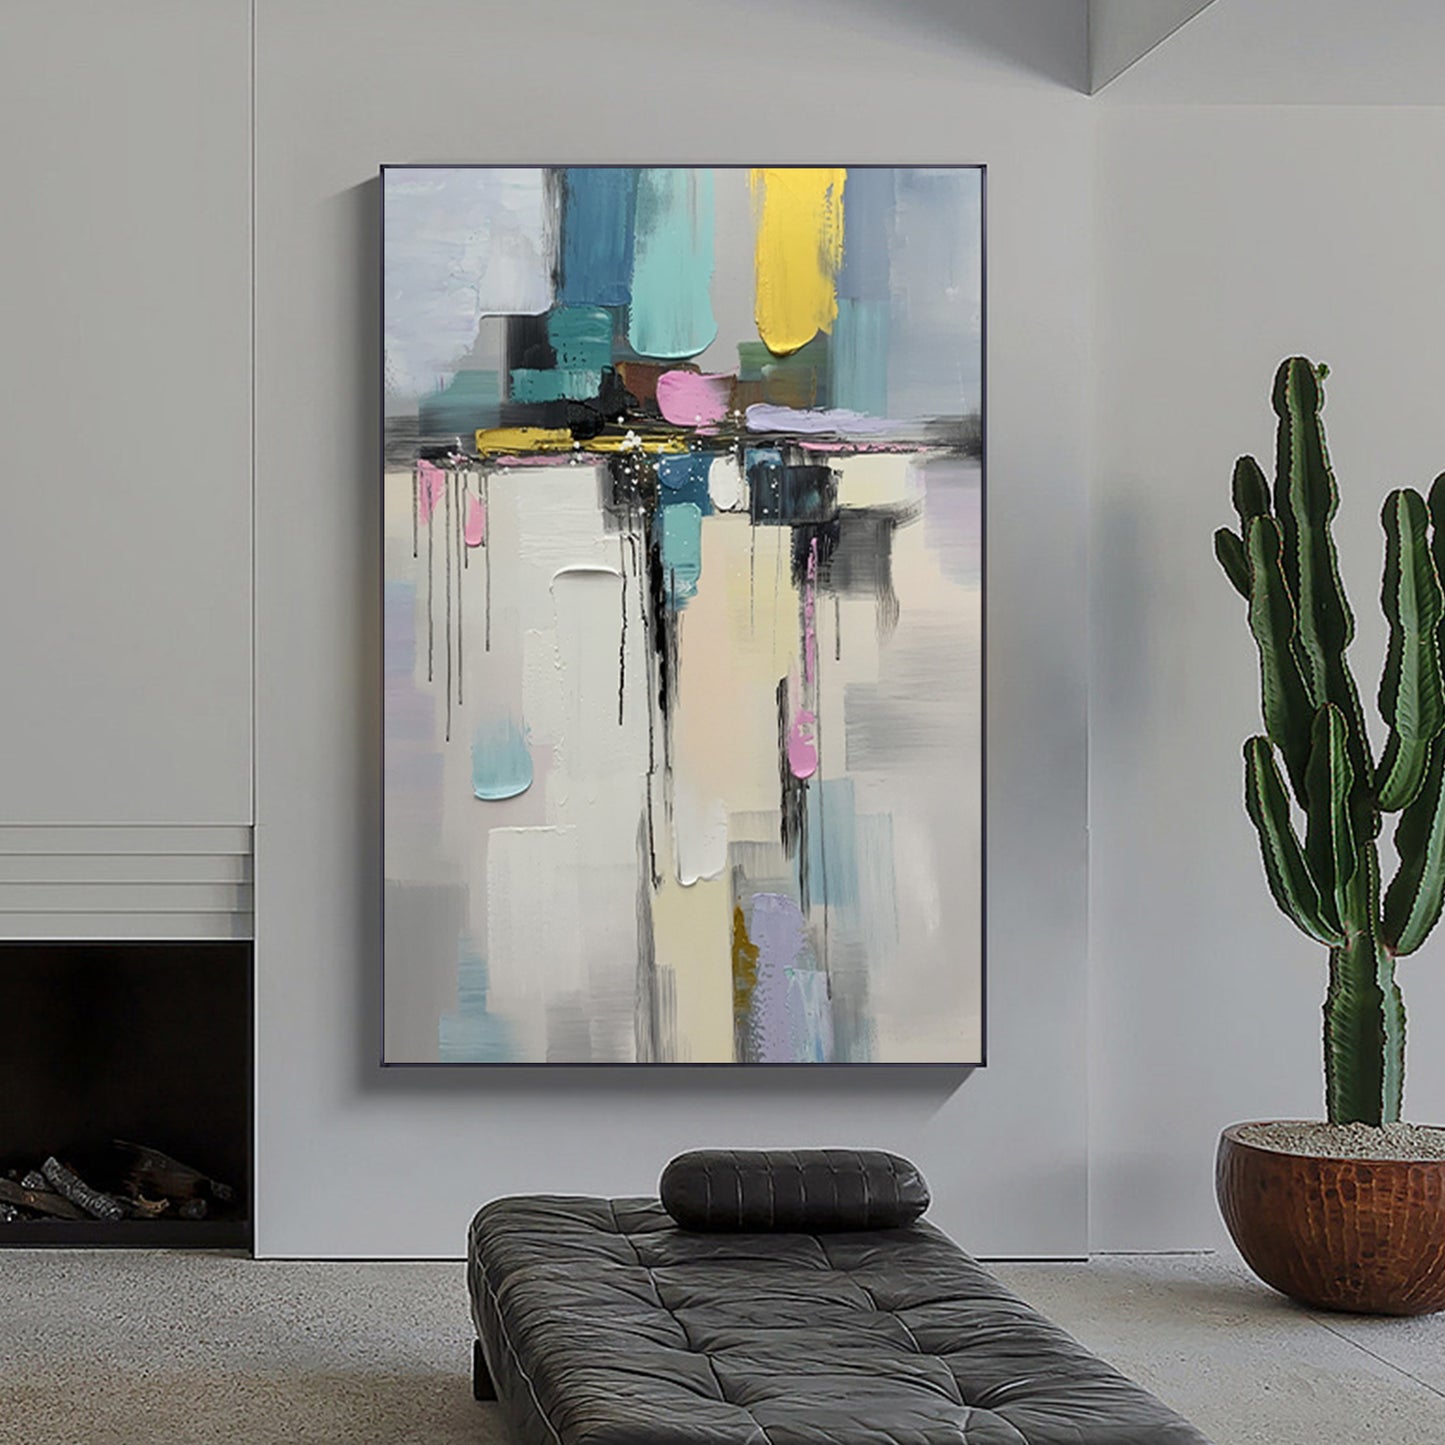 ABSTRACT PAINTING, MODEN LIFE, HAND-PAINTED CANVAS